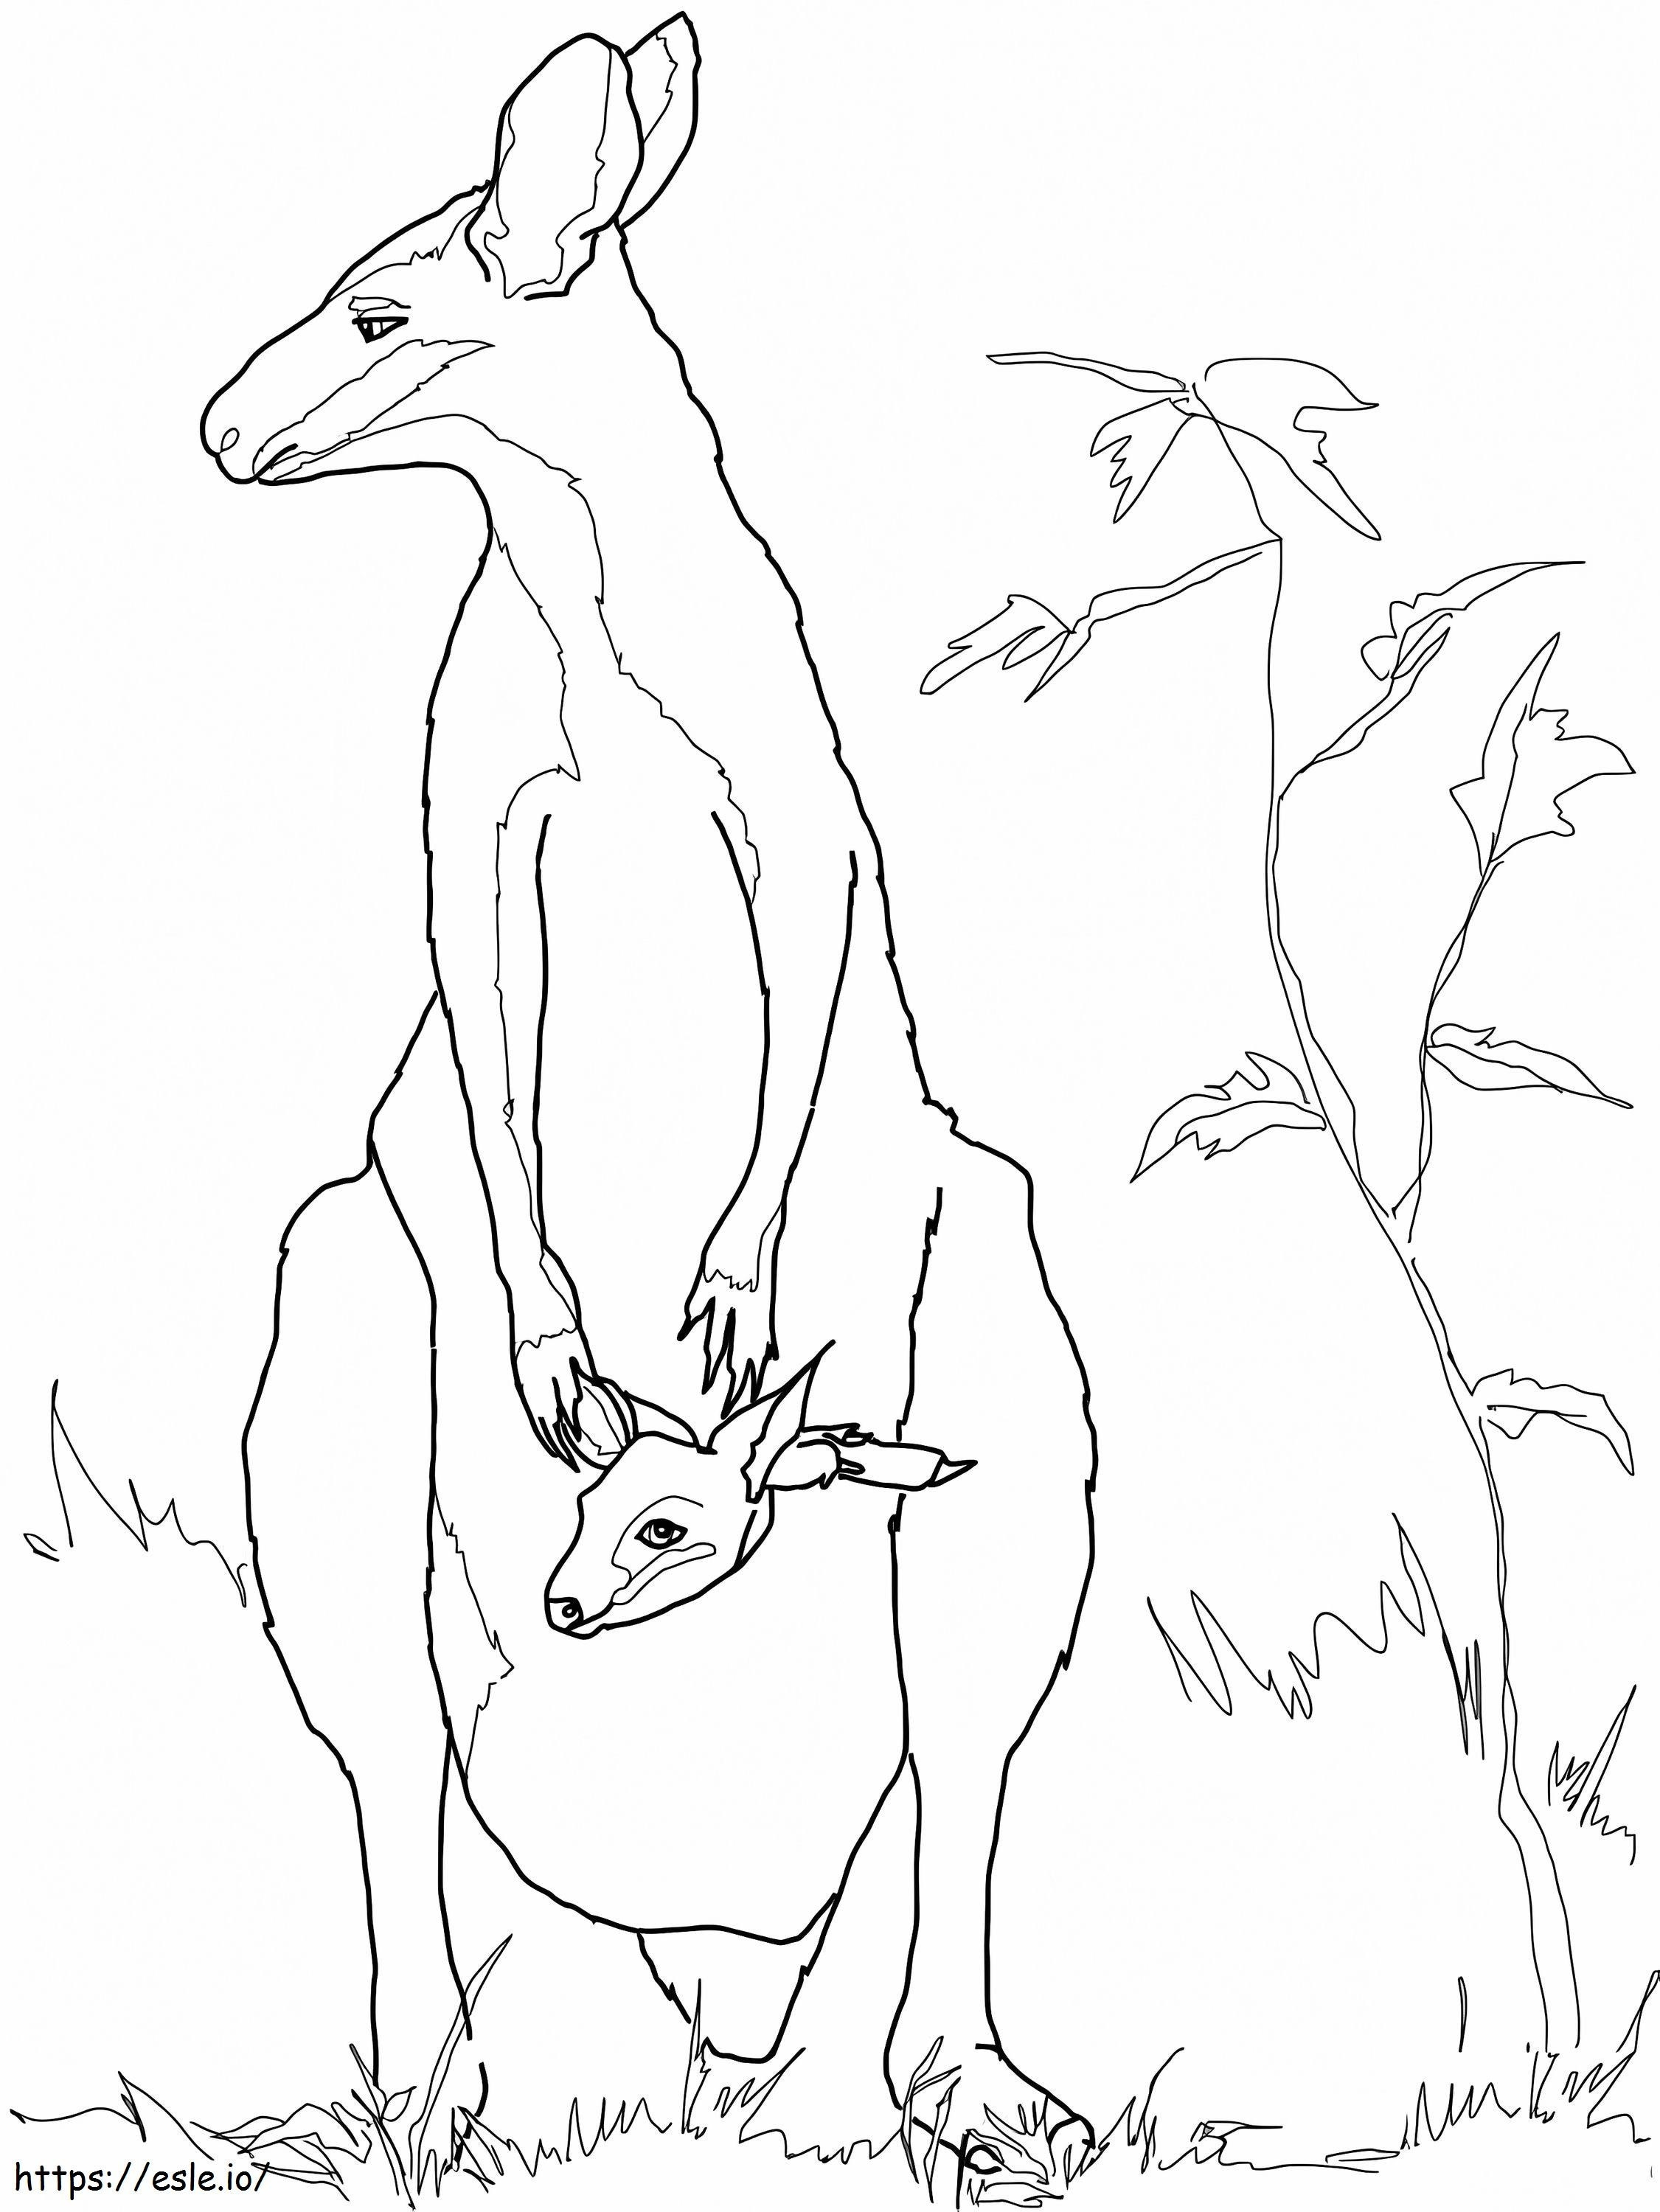 Mother Wallaby And Baby coloring page